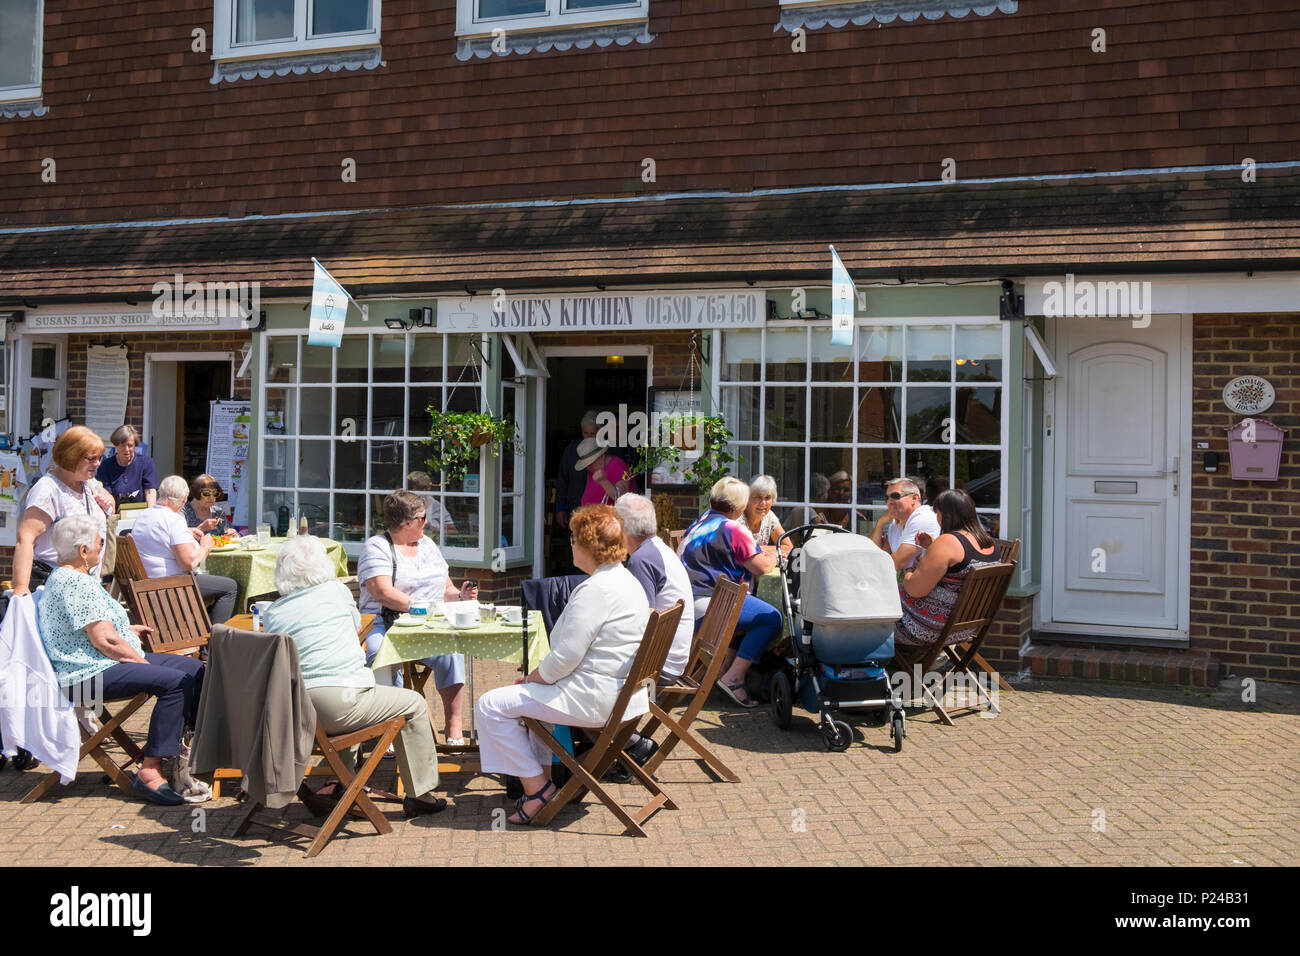 Group of people sitting outside drinking and eating, susies kitchen, tenterden, kent, uk Stock Photo